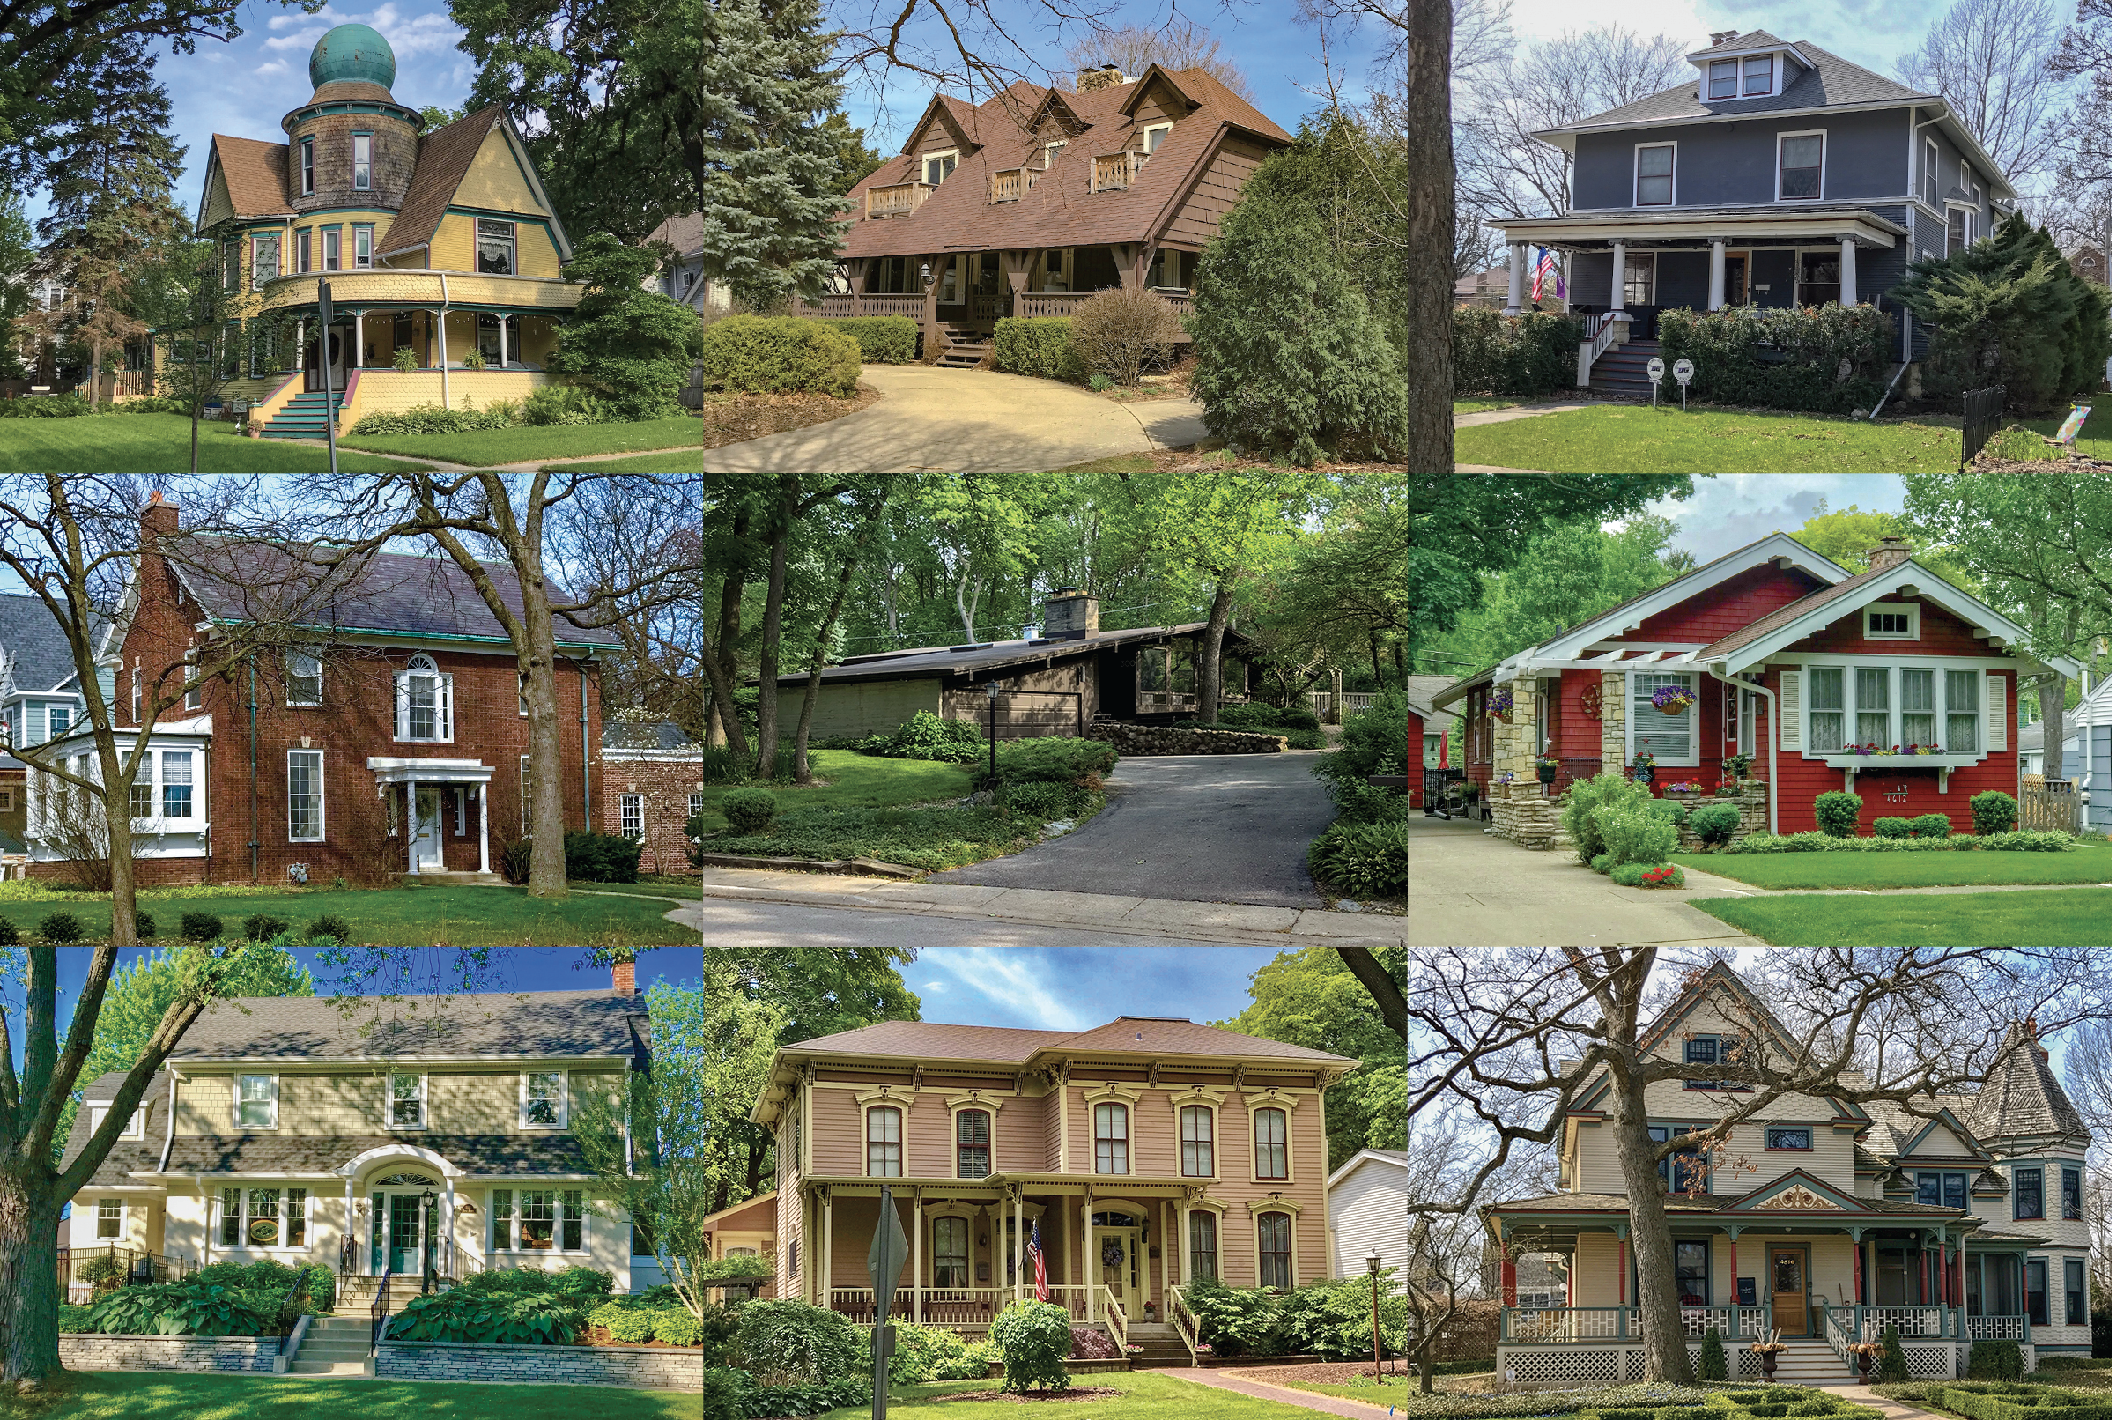 Architectural Styles of Downers Grove